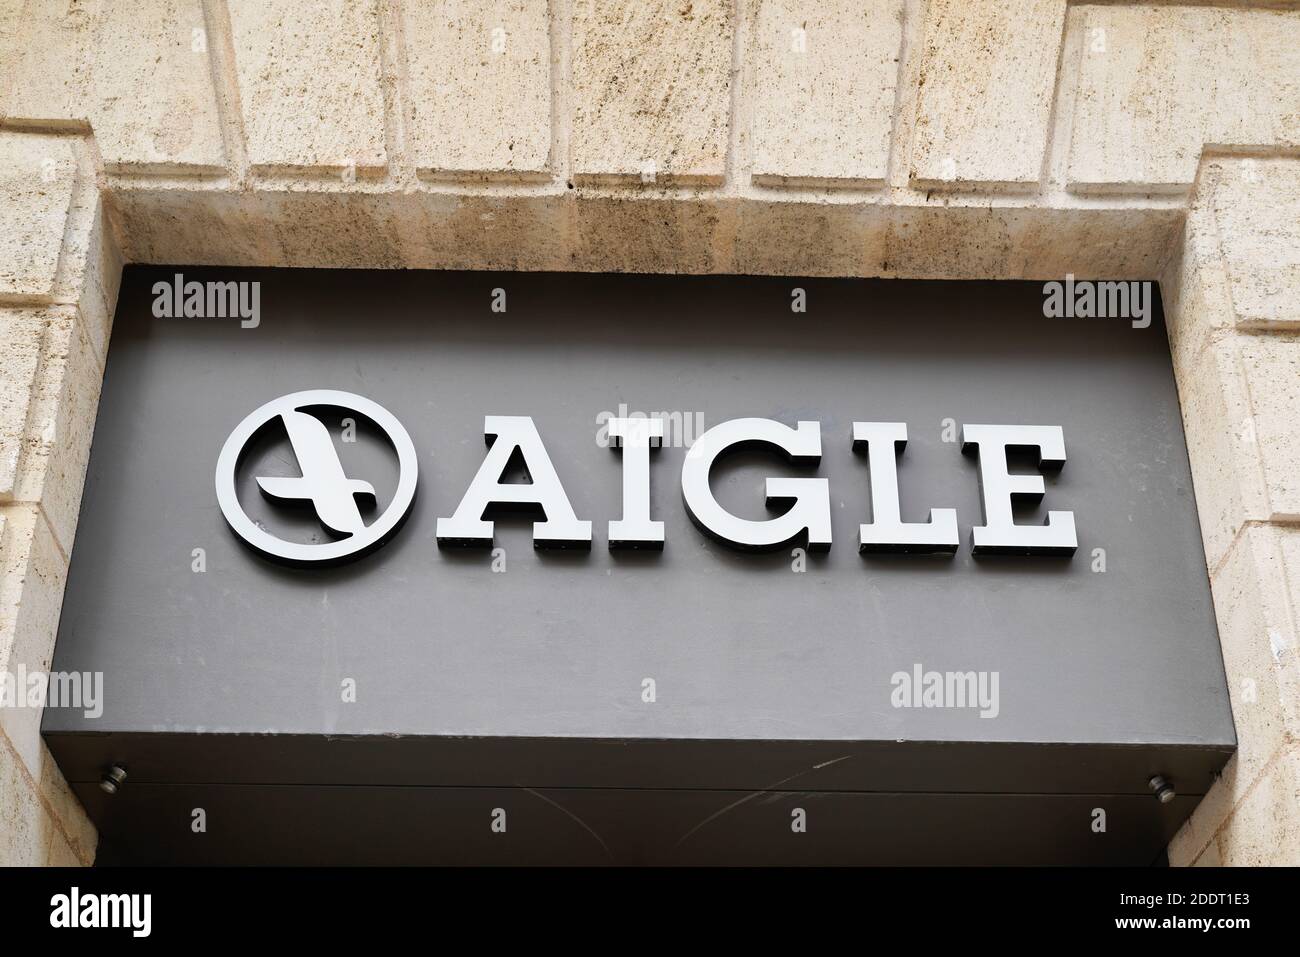 Bordeaux , Aquitaine France - 11 11 2020 : aigle sign text and logo store french BOOTS SHOES AND CLOTHING shop signage Stock Photo - Alamy